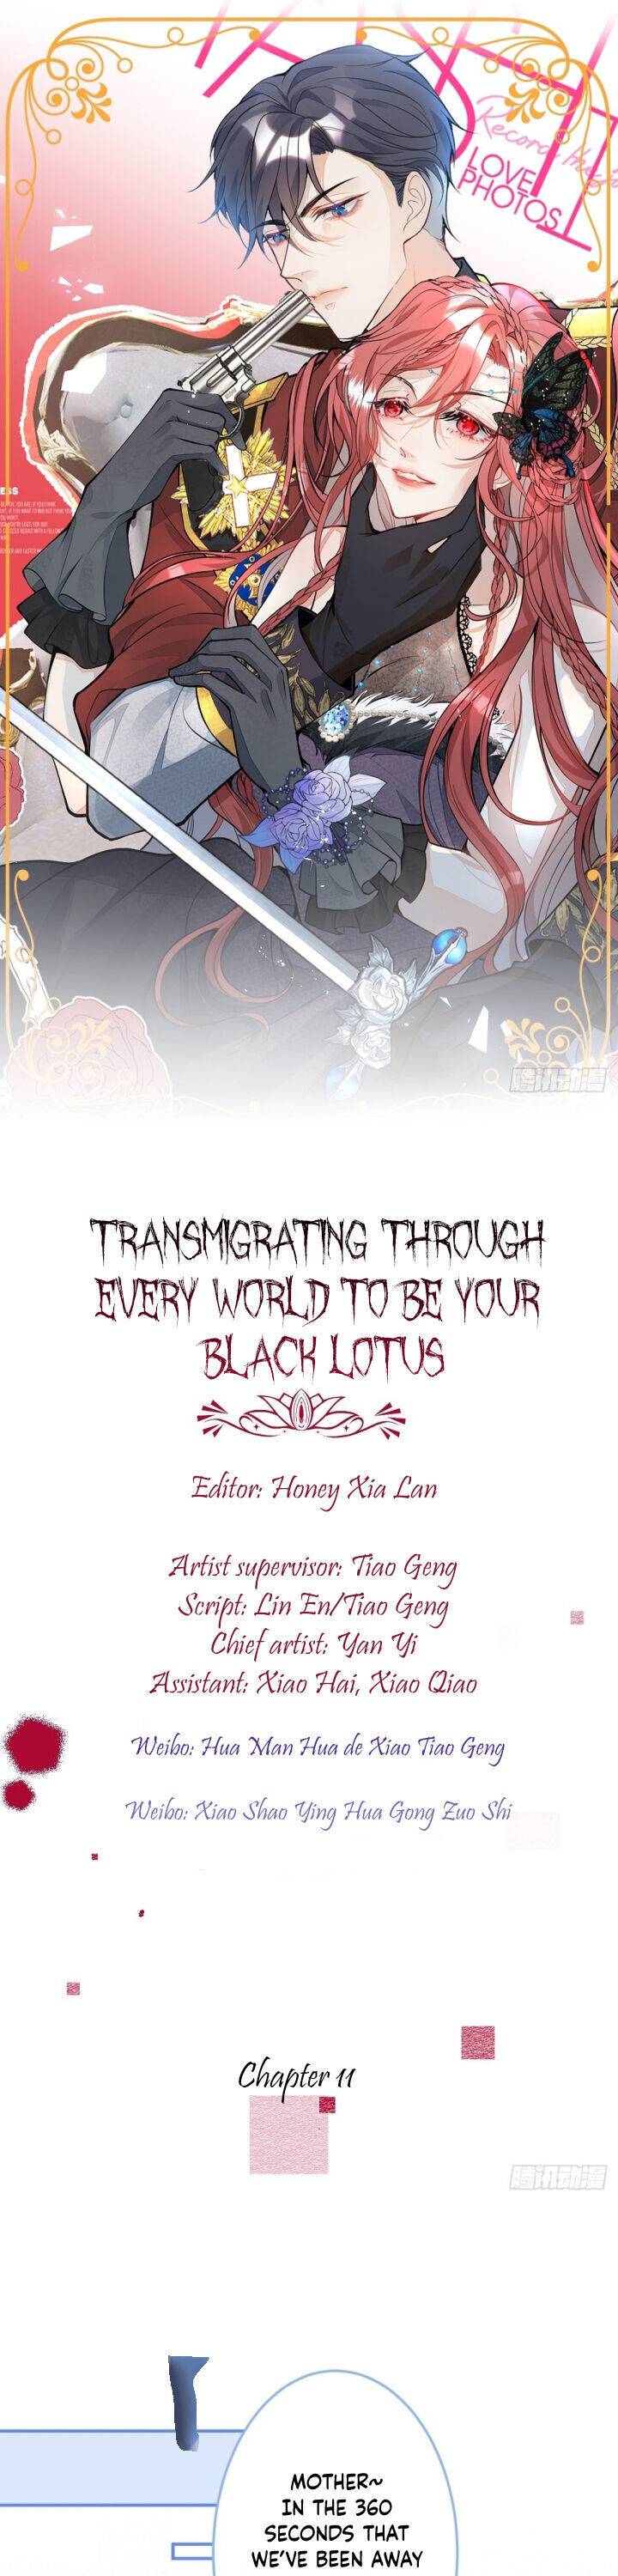 Transmigrating Through Every World to Be Your Black Lotus Chapter 11 - Page 0